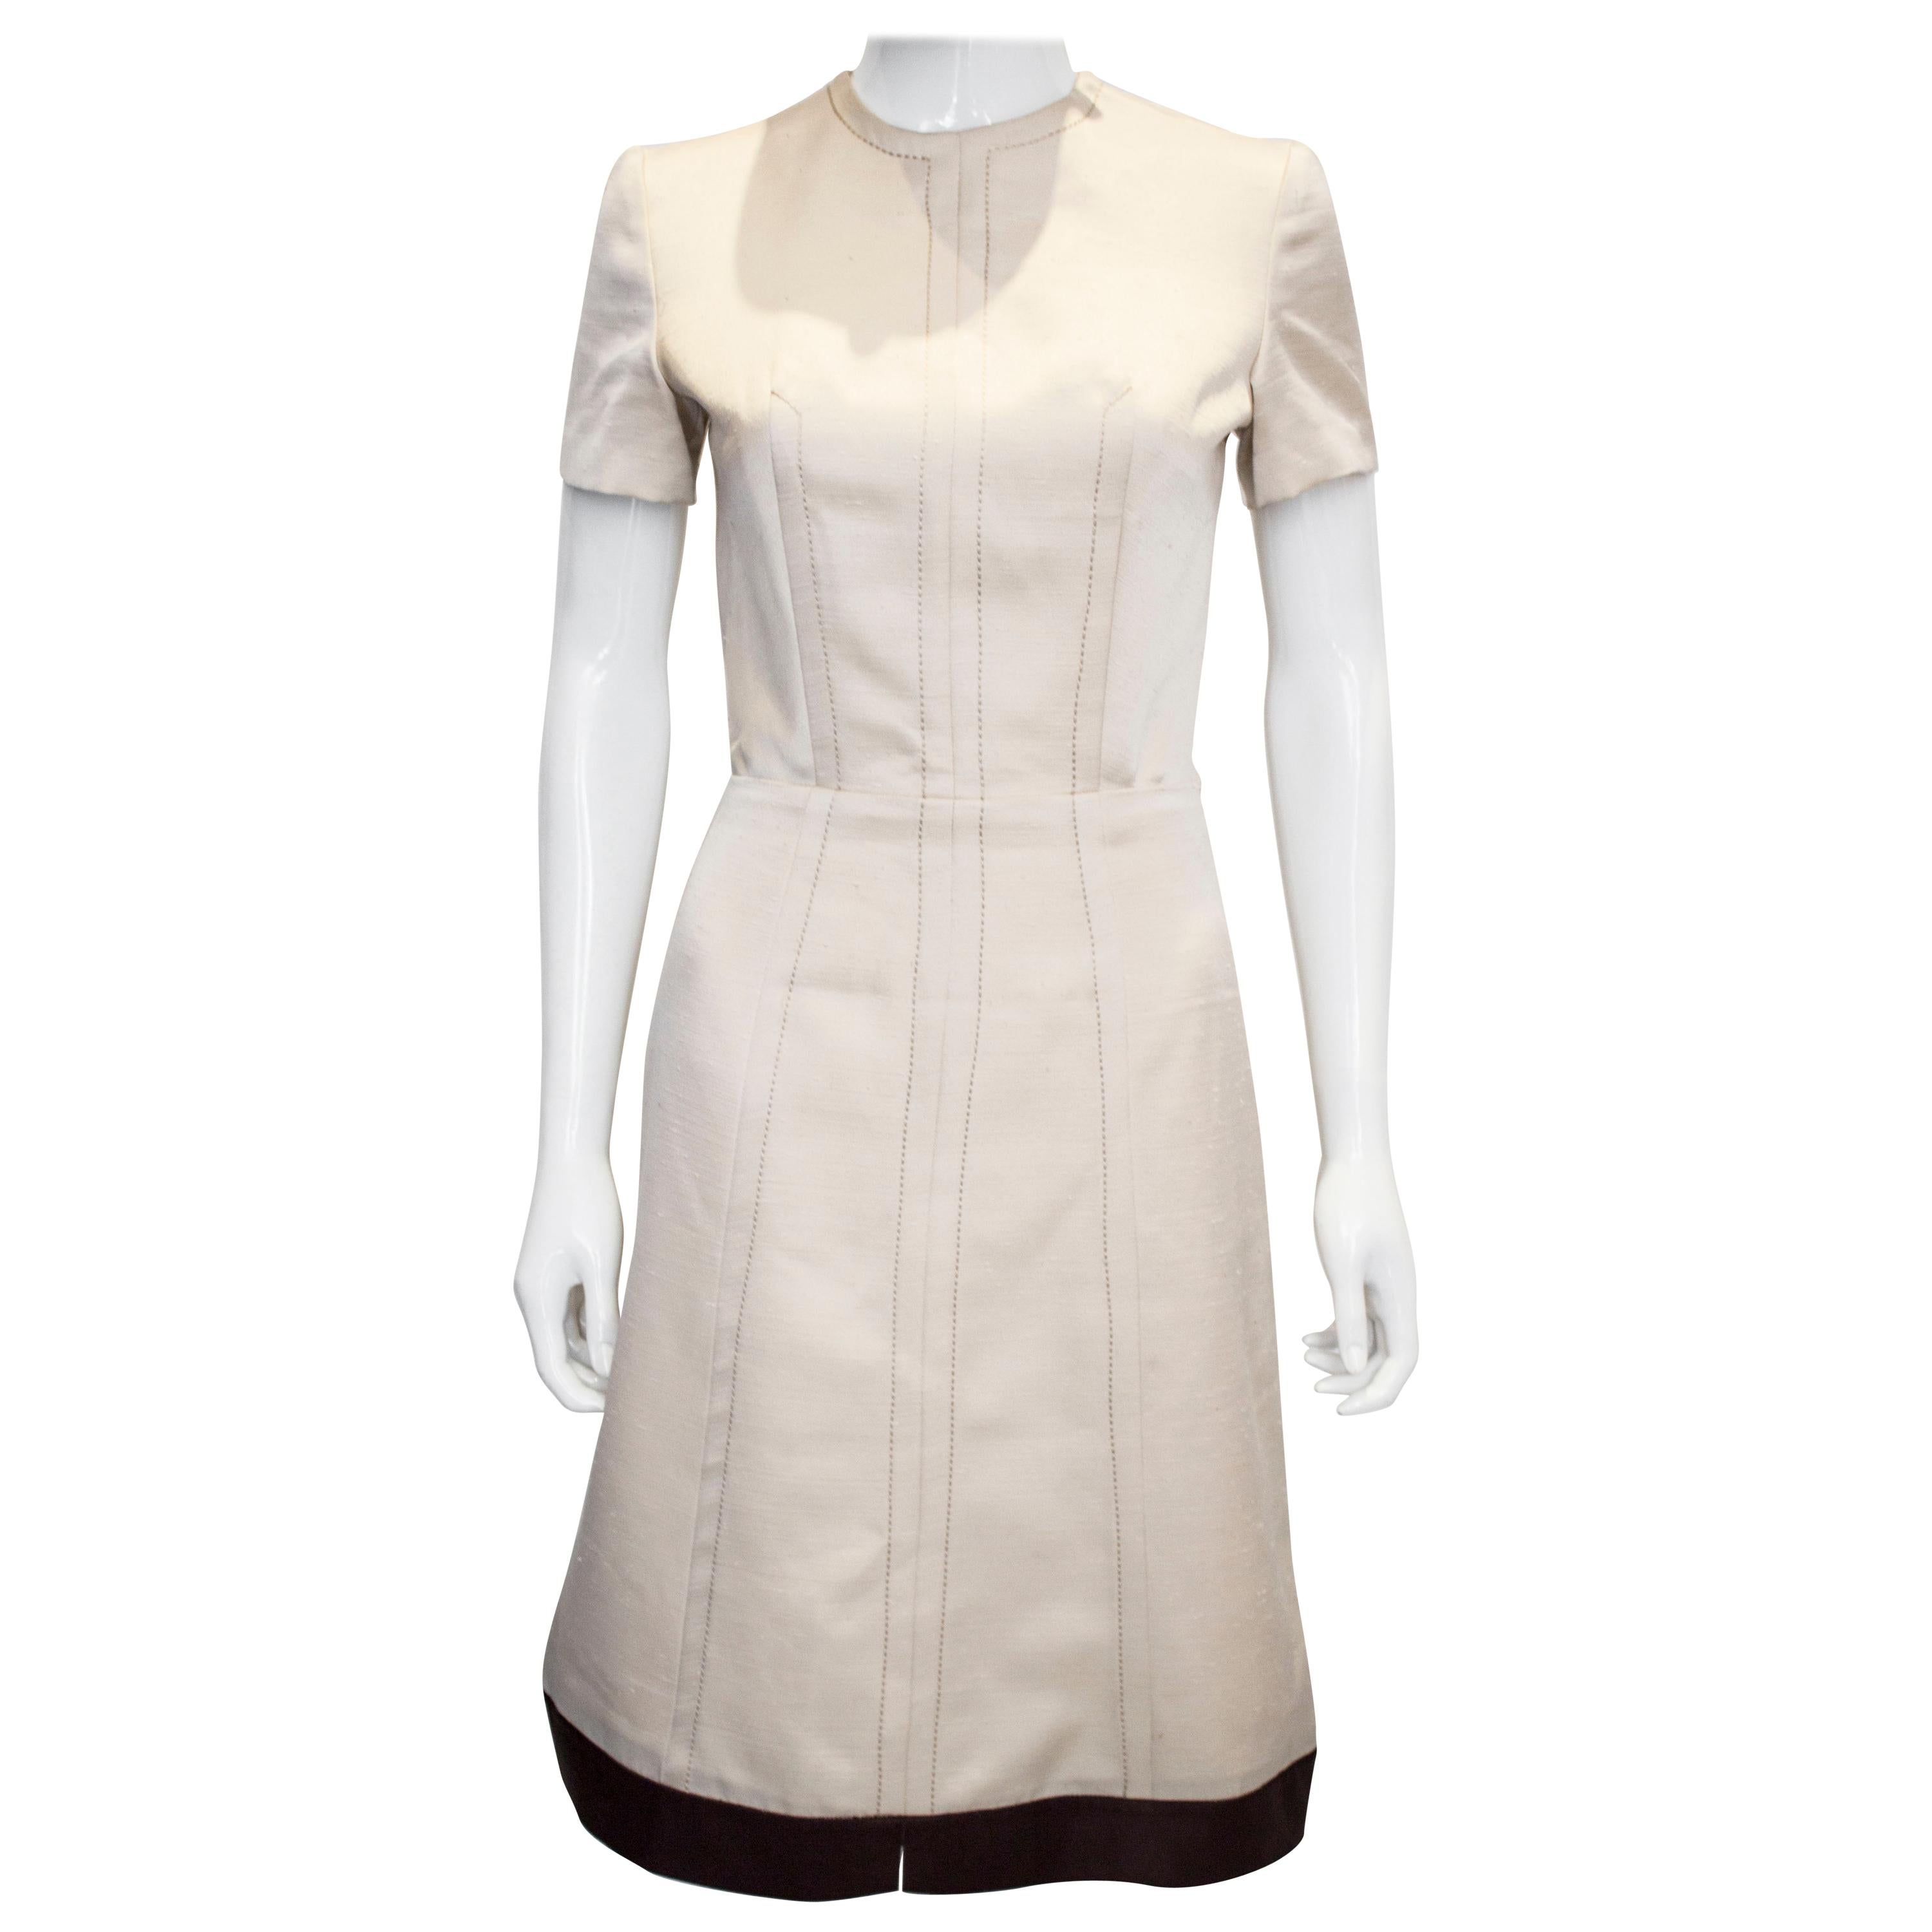 A vintage 1950s - 1960s cream fitted raw silk dress small